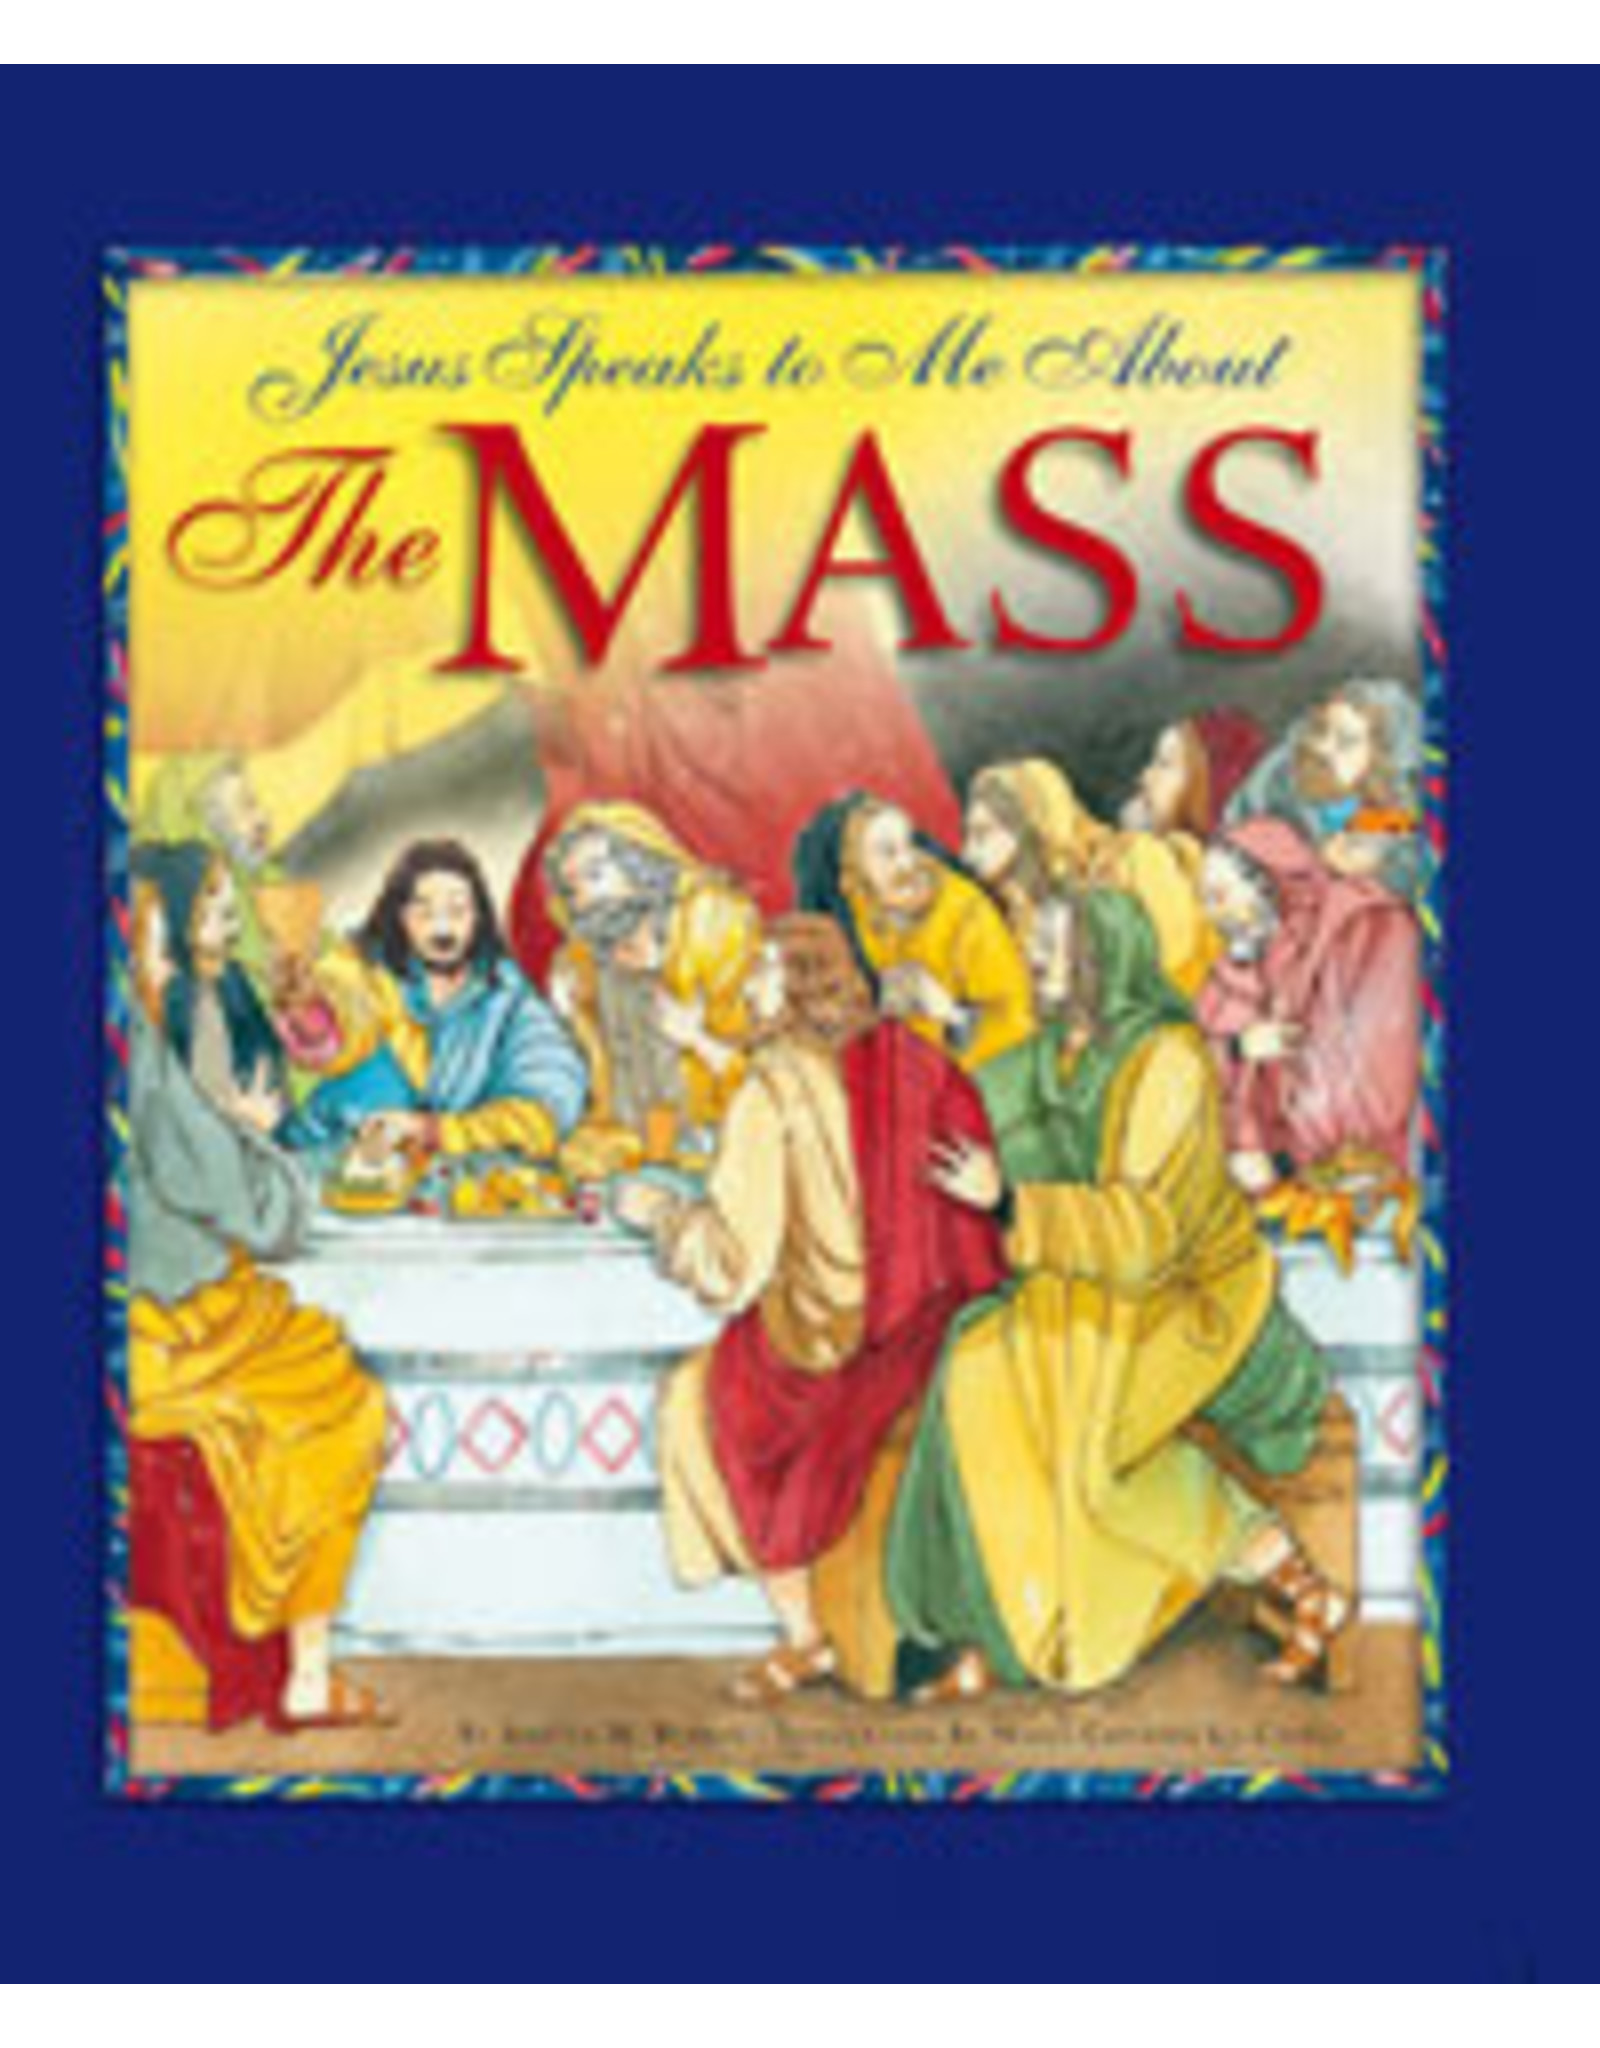 Word Among Us Jesus Speaks to Me about the Mass